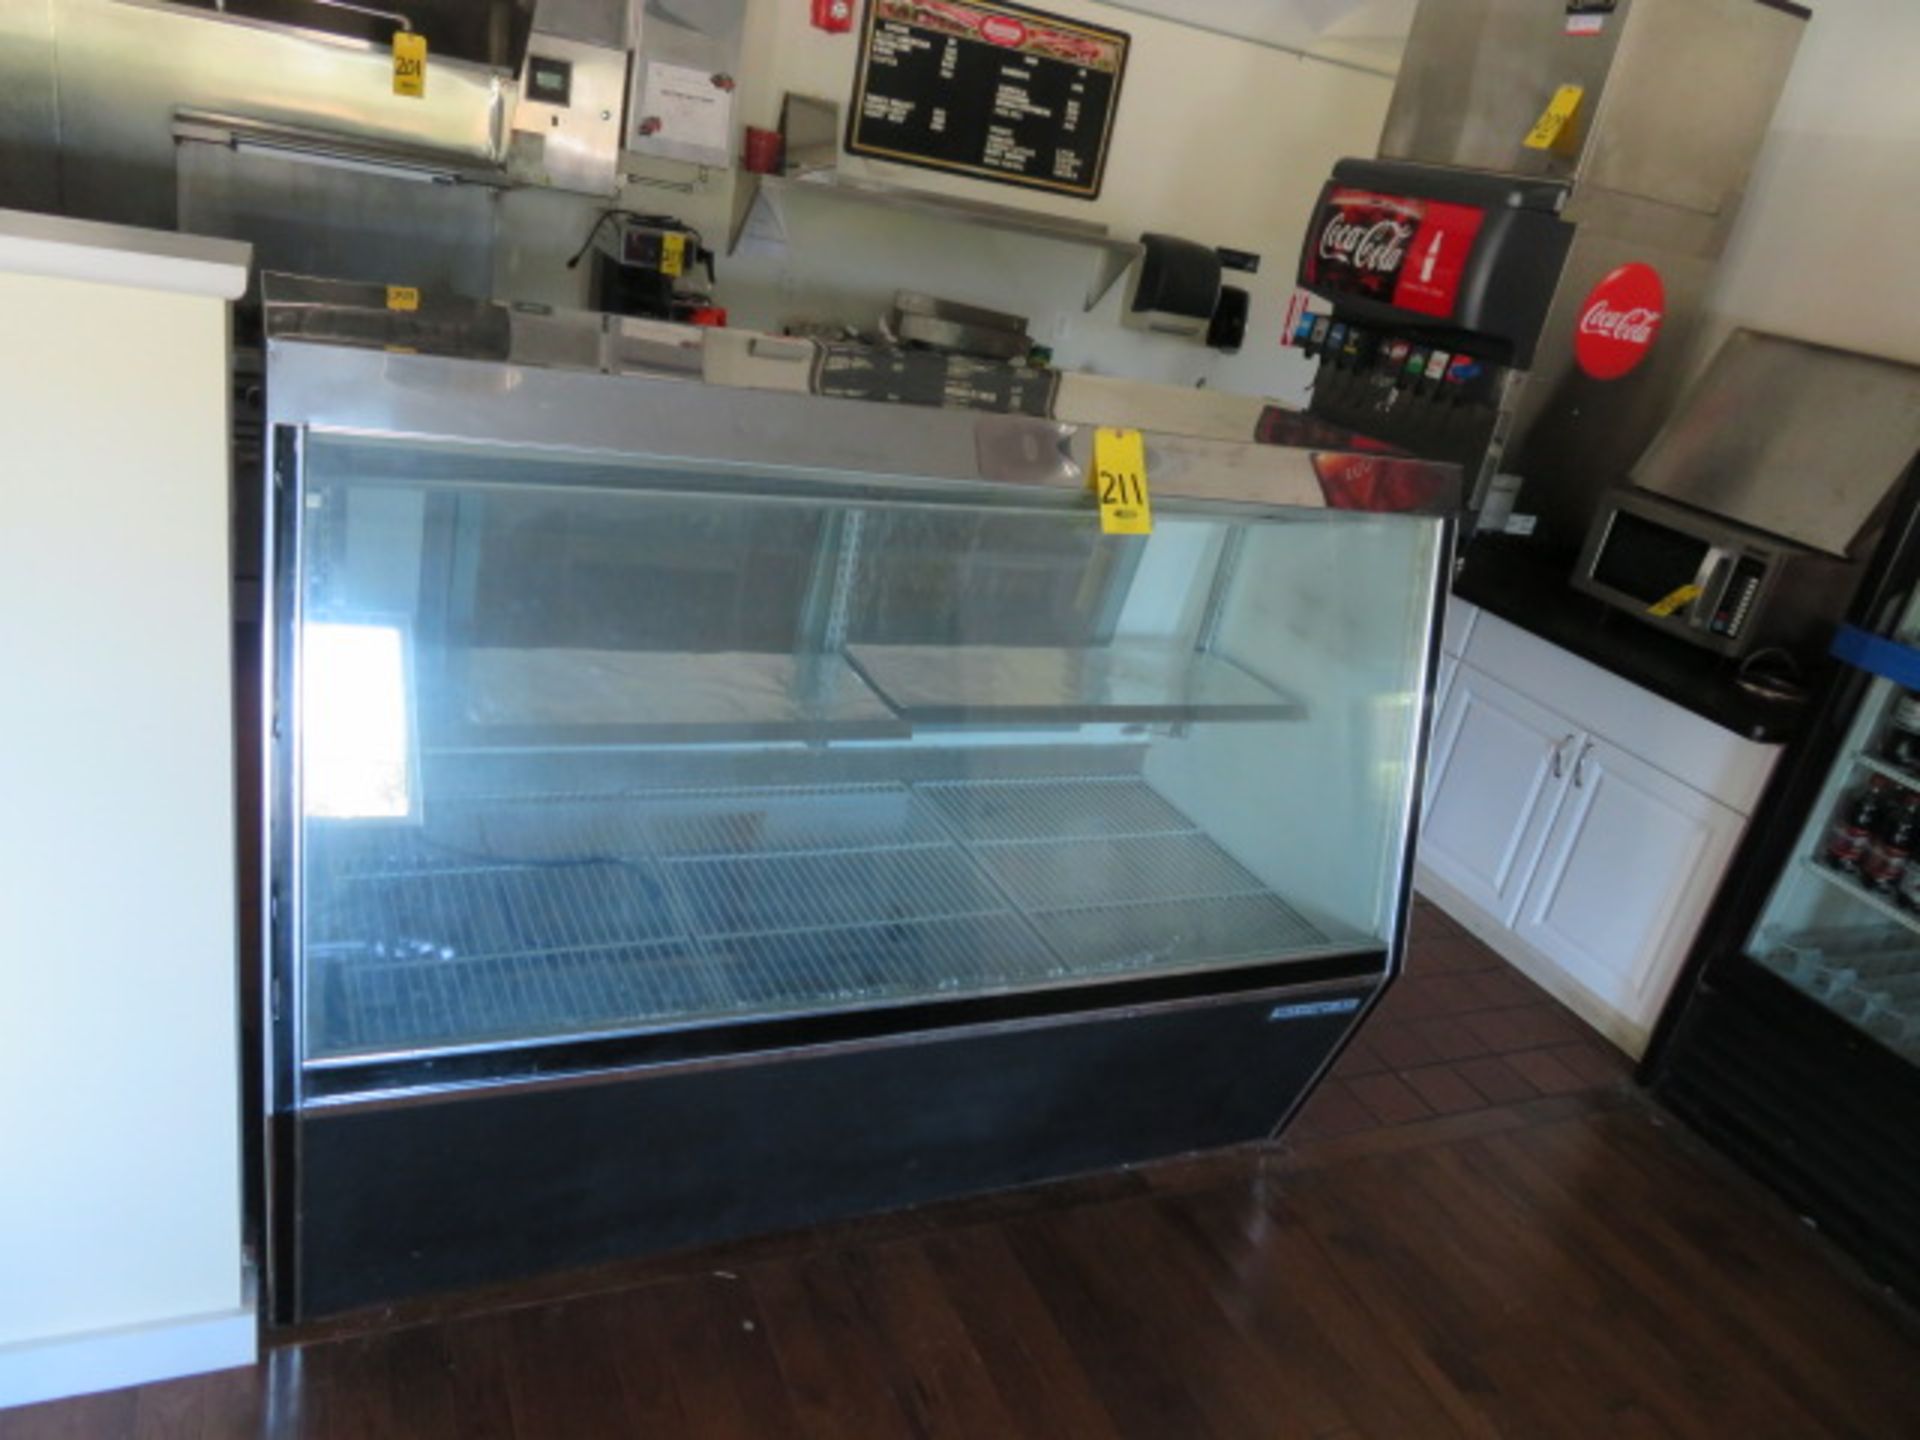 BEVERAGE-AIR 5' S/C FLAT GLASS DELI CASE (Located - Mays Landing, NJ) - Image 3 of 4